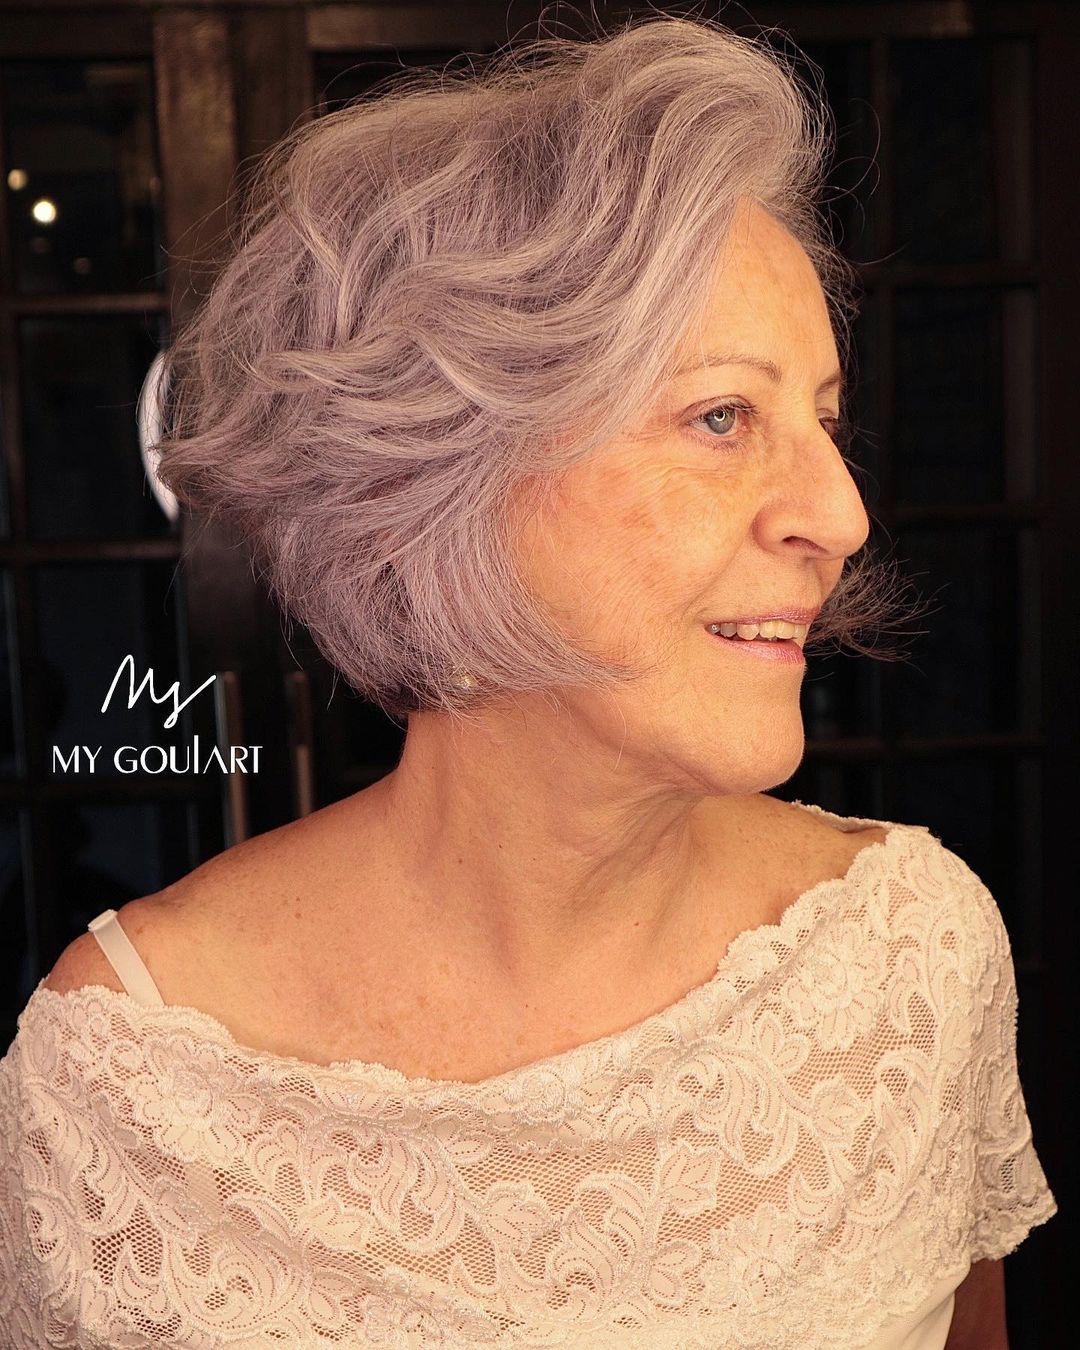 Fashionable summer haircuts for women 60 years old: 14 delightful ideas